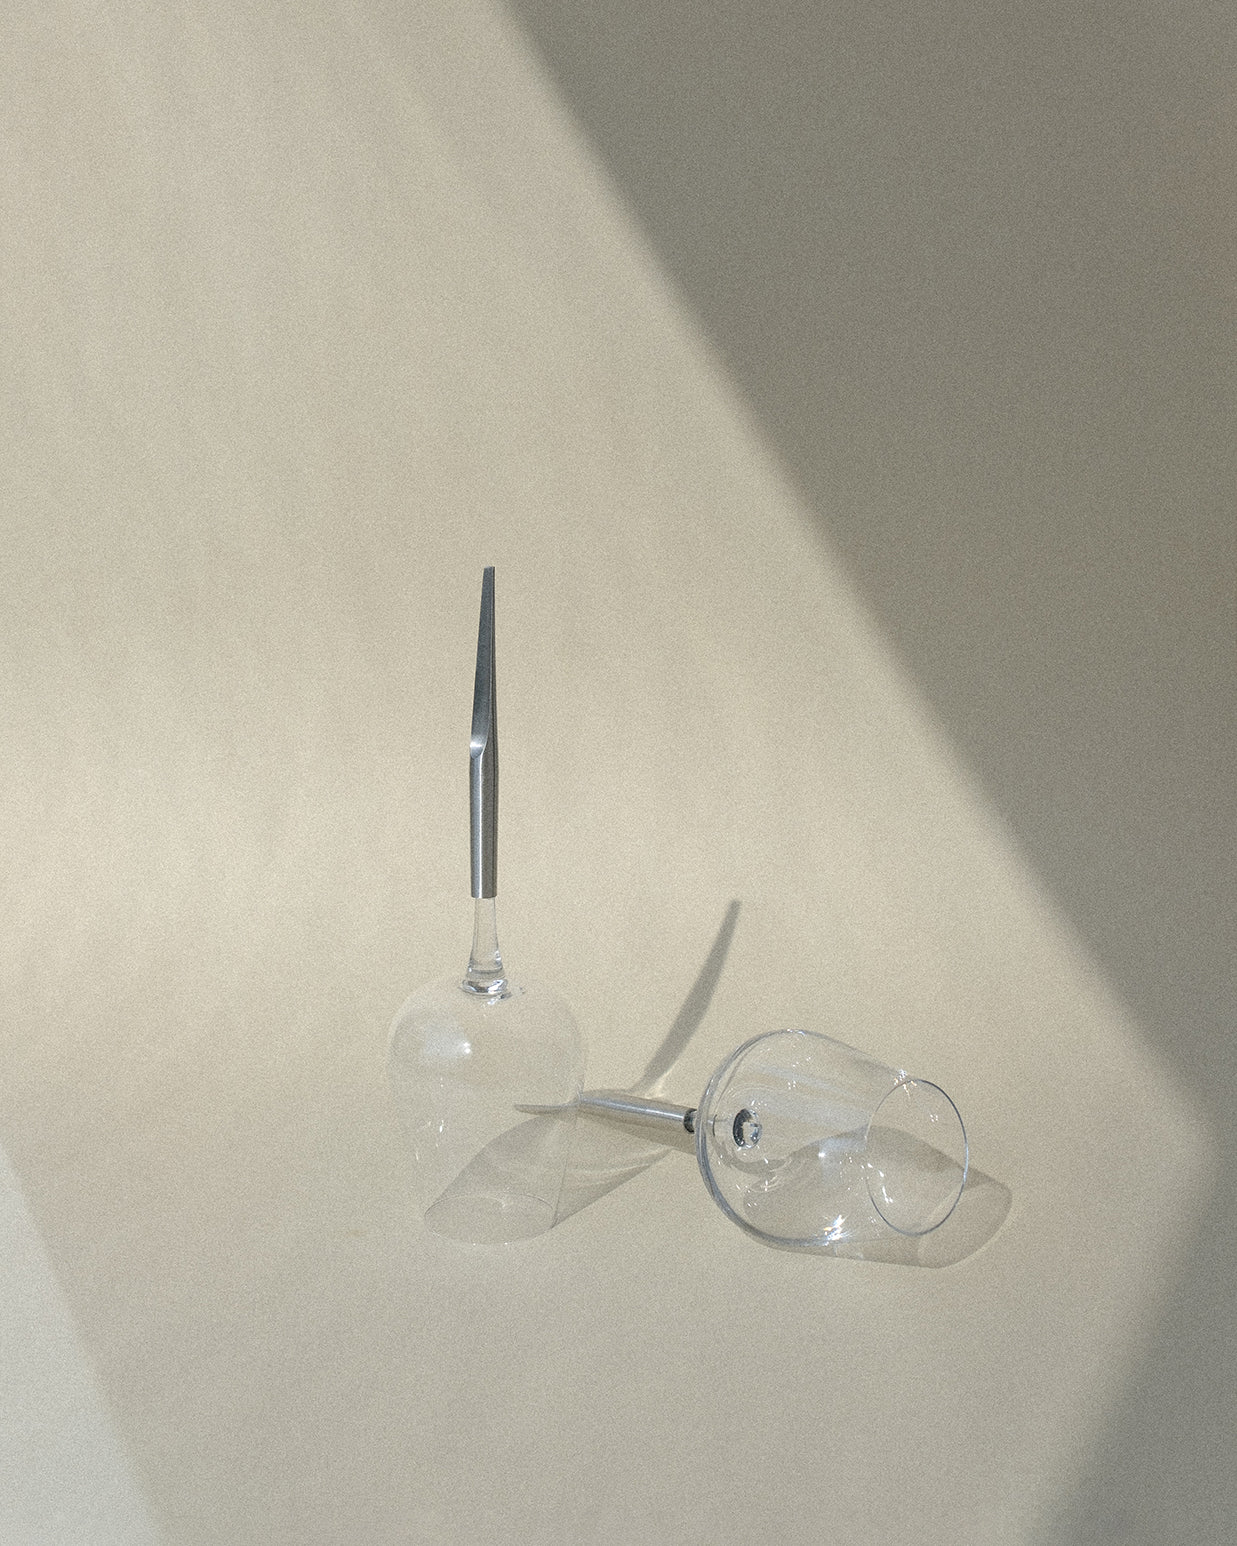 two wine glasses for picnic with metal pin, one upside down and one next to it laying horizontally, with shadows on the background